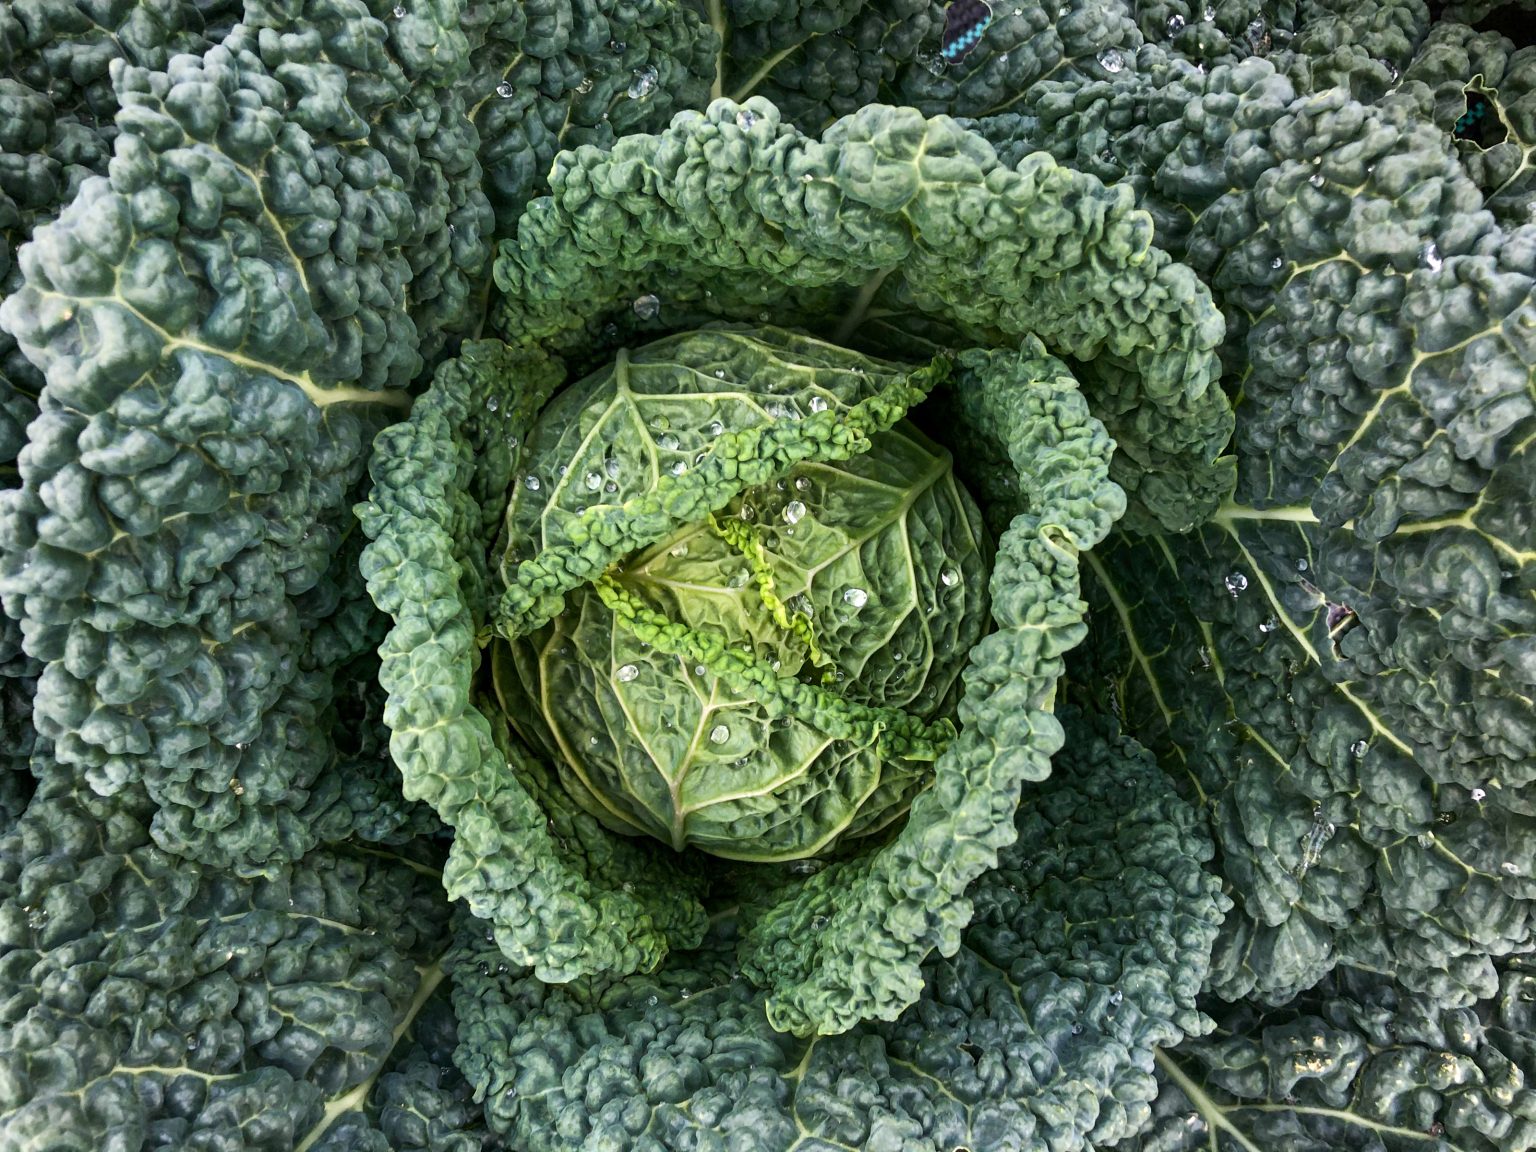 Close-up view of savoy cabbage. Photo contributed by Martin Sauter to the WordPress Photo Directory.